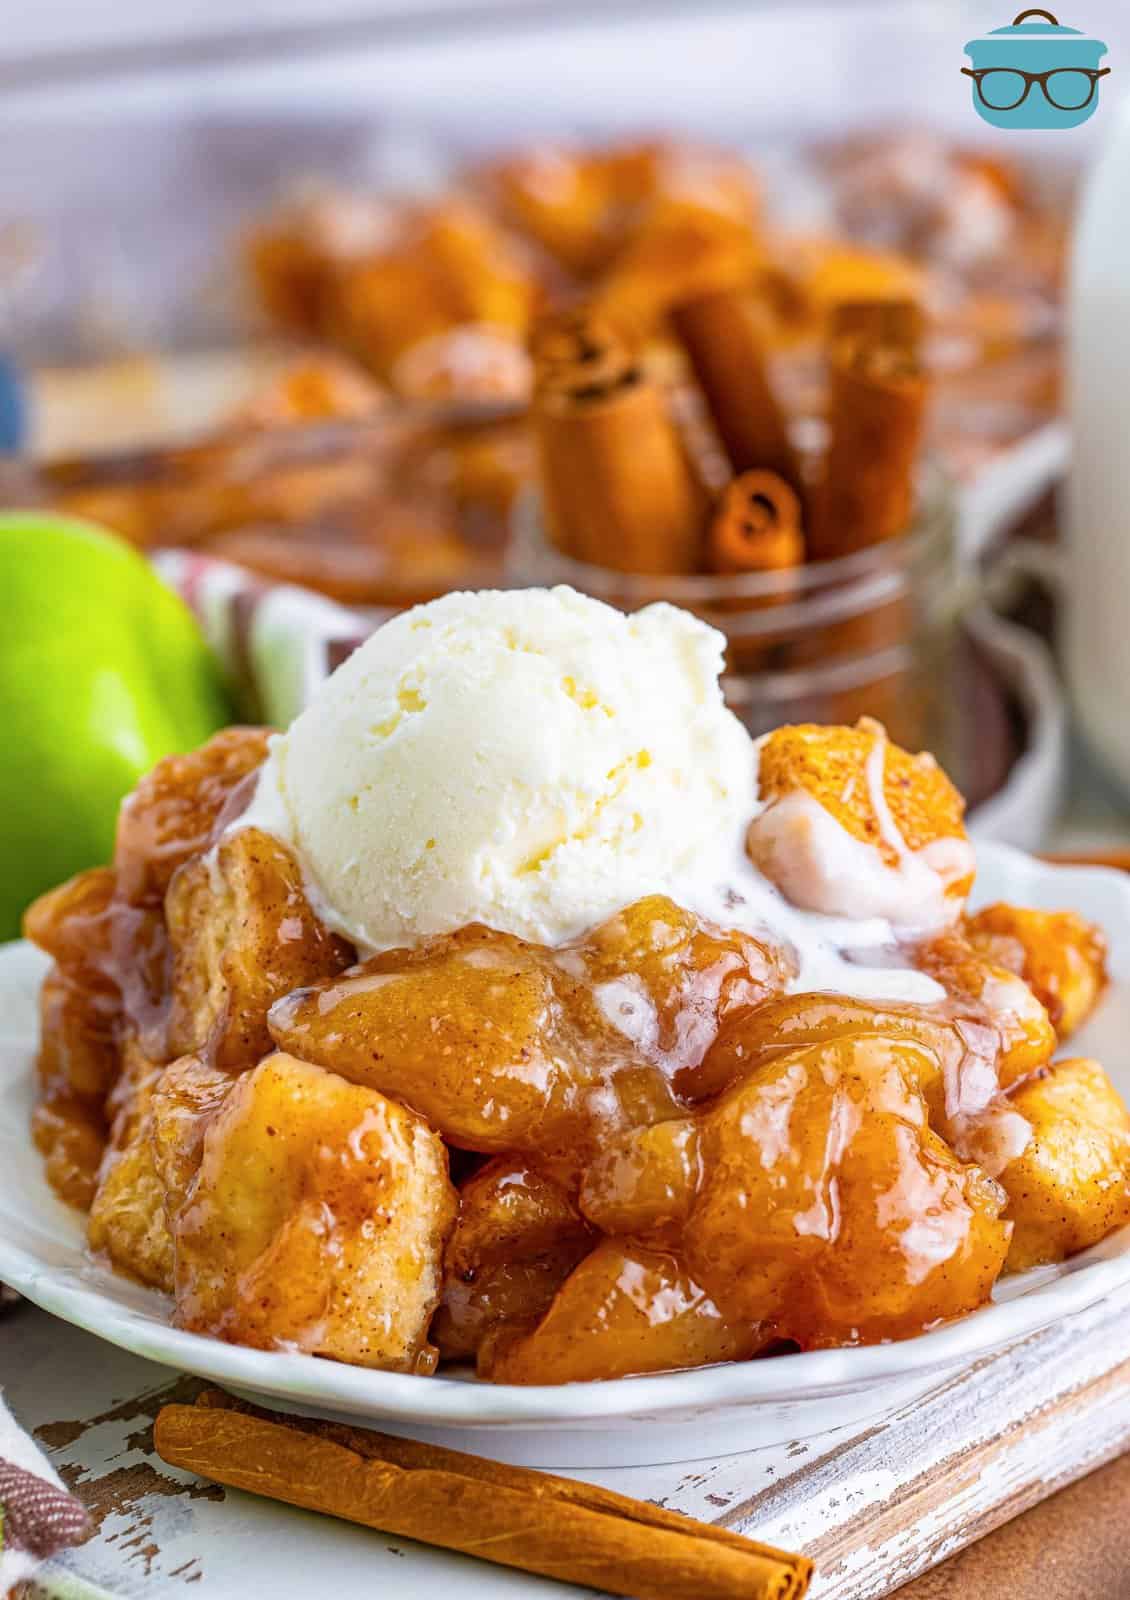 A plate of Apple Pie Bubble Up with a scoop of vanilla ice cream.